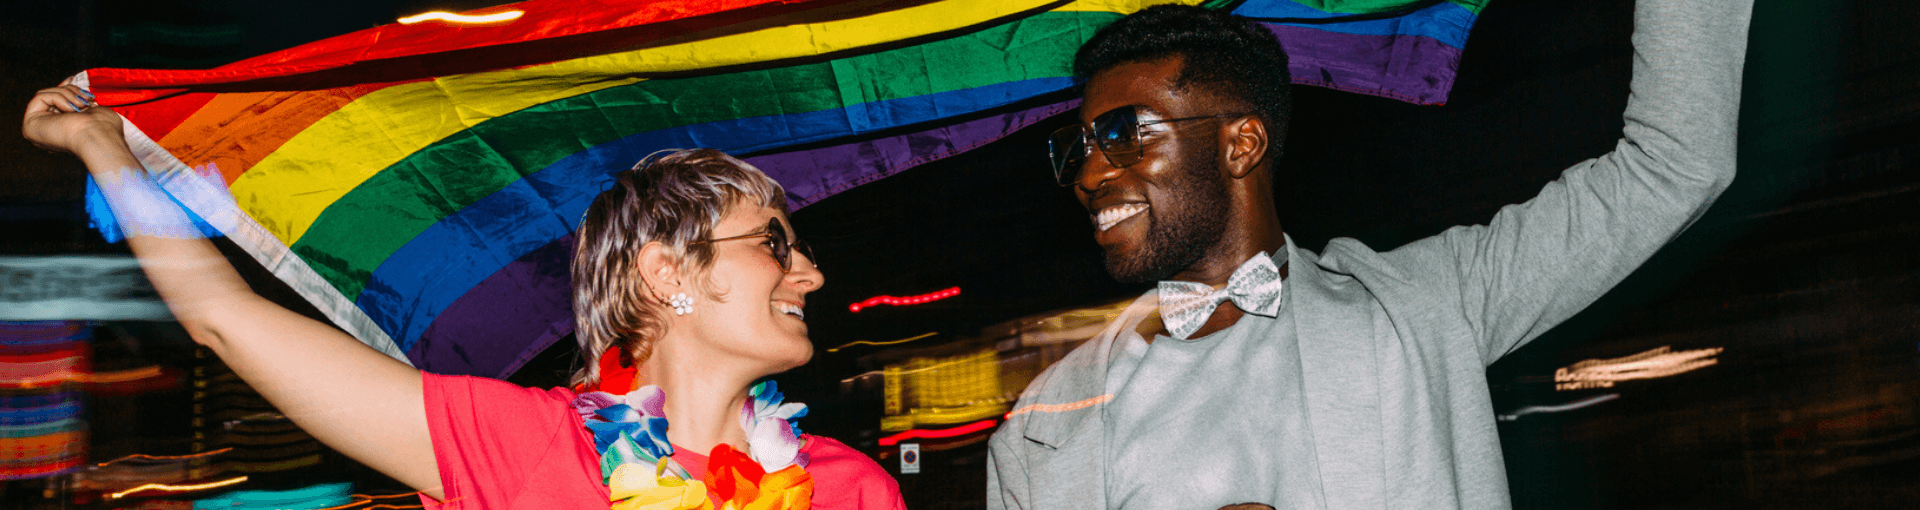 A Black person wearing a bowtie, and a white person wearing a garland of flowers, hold a Pride flag up and smile at each other. They're in a city at night, and the lights behind them are blurred.